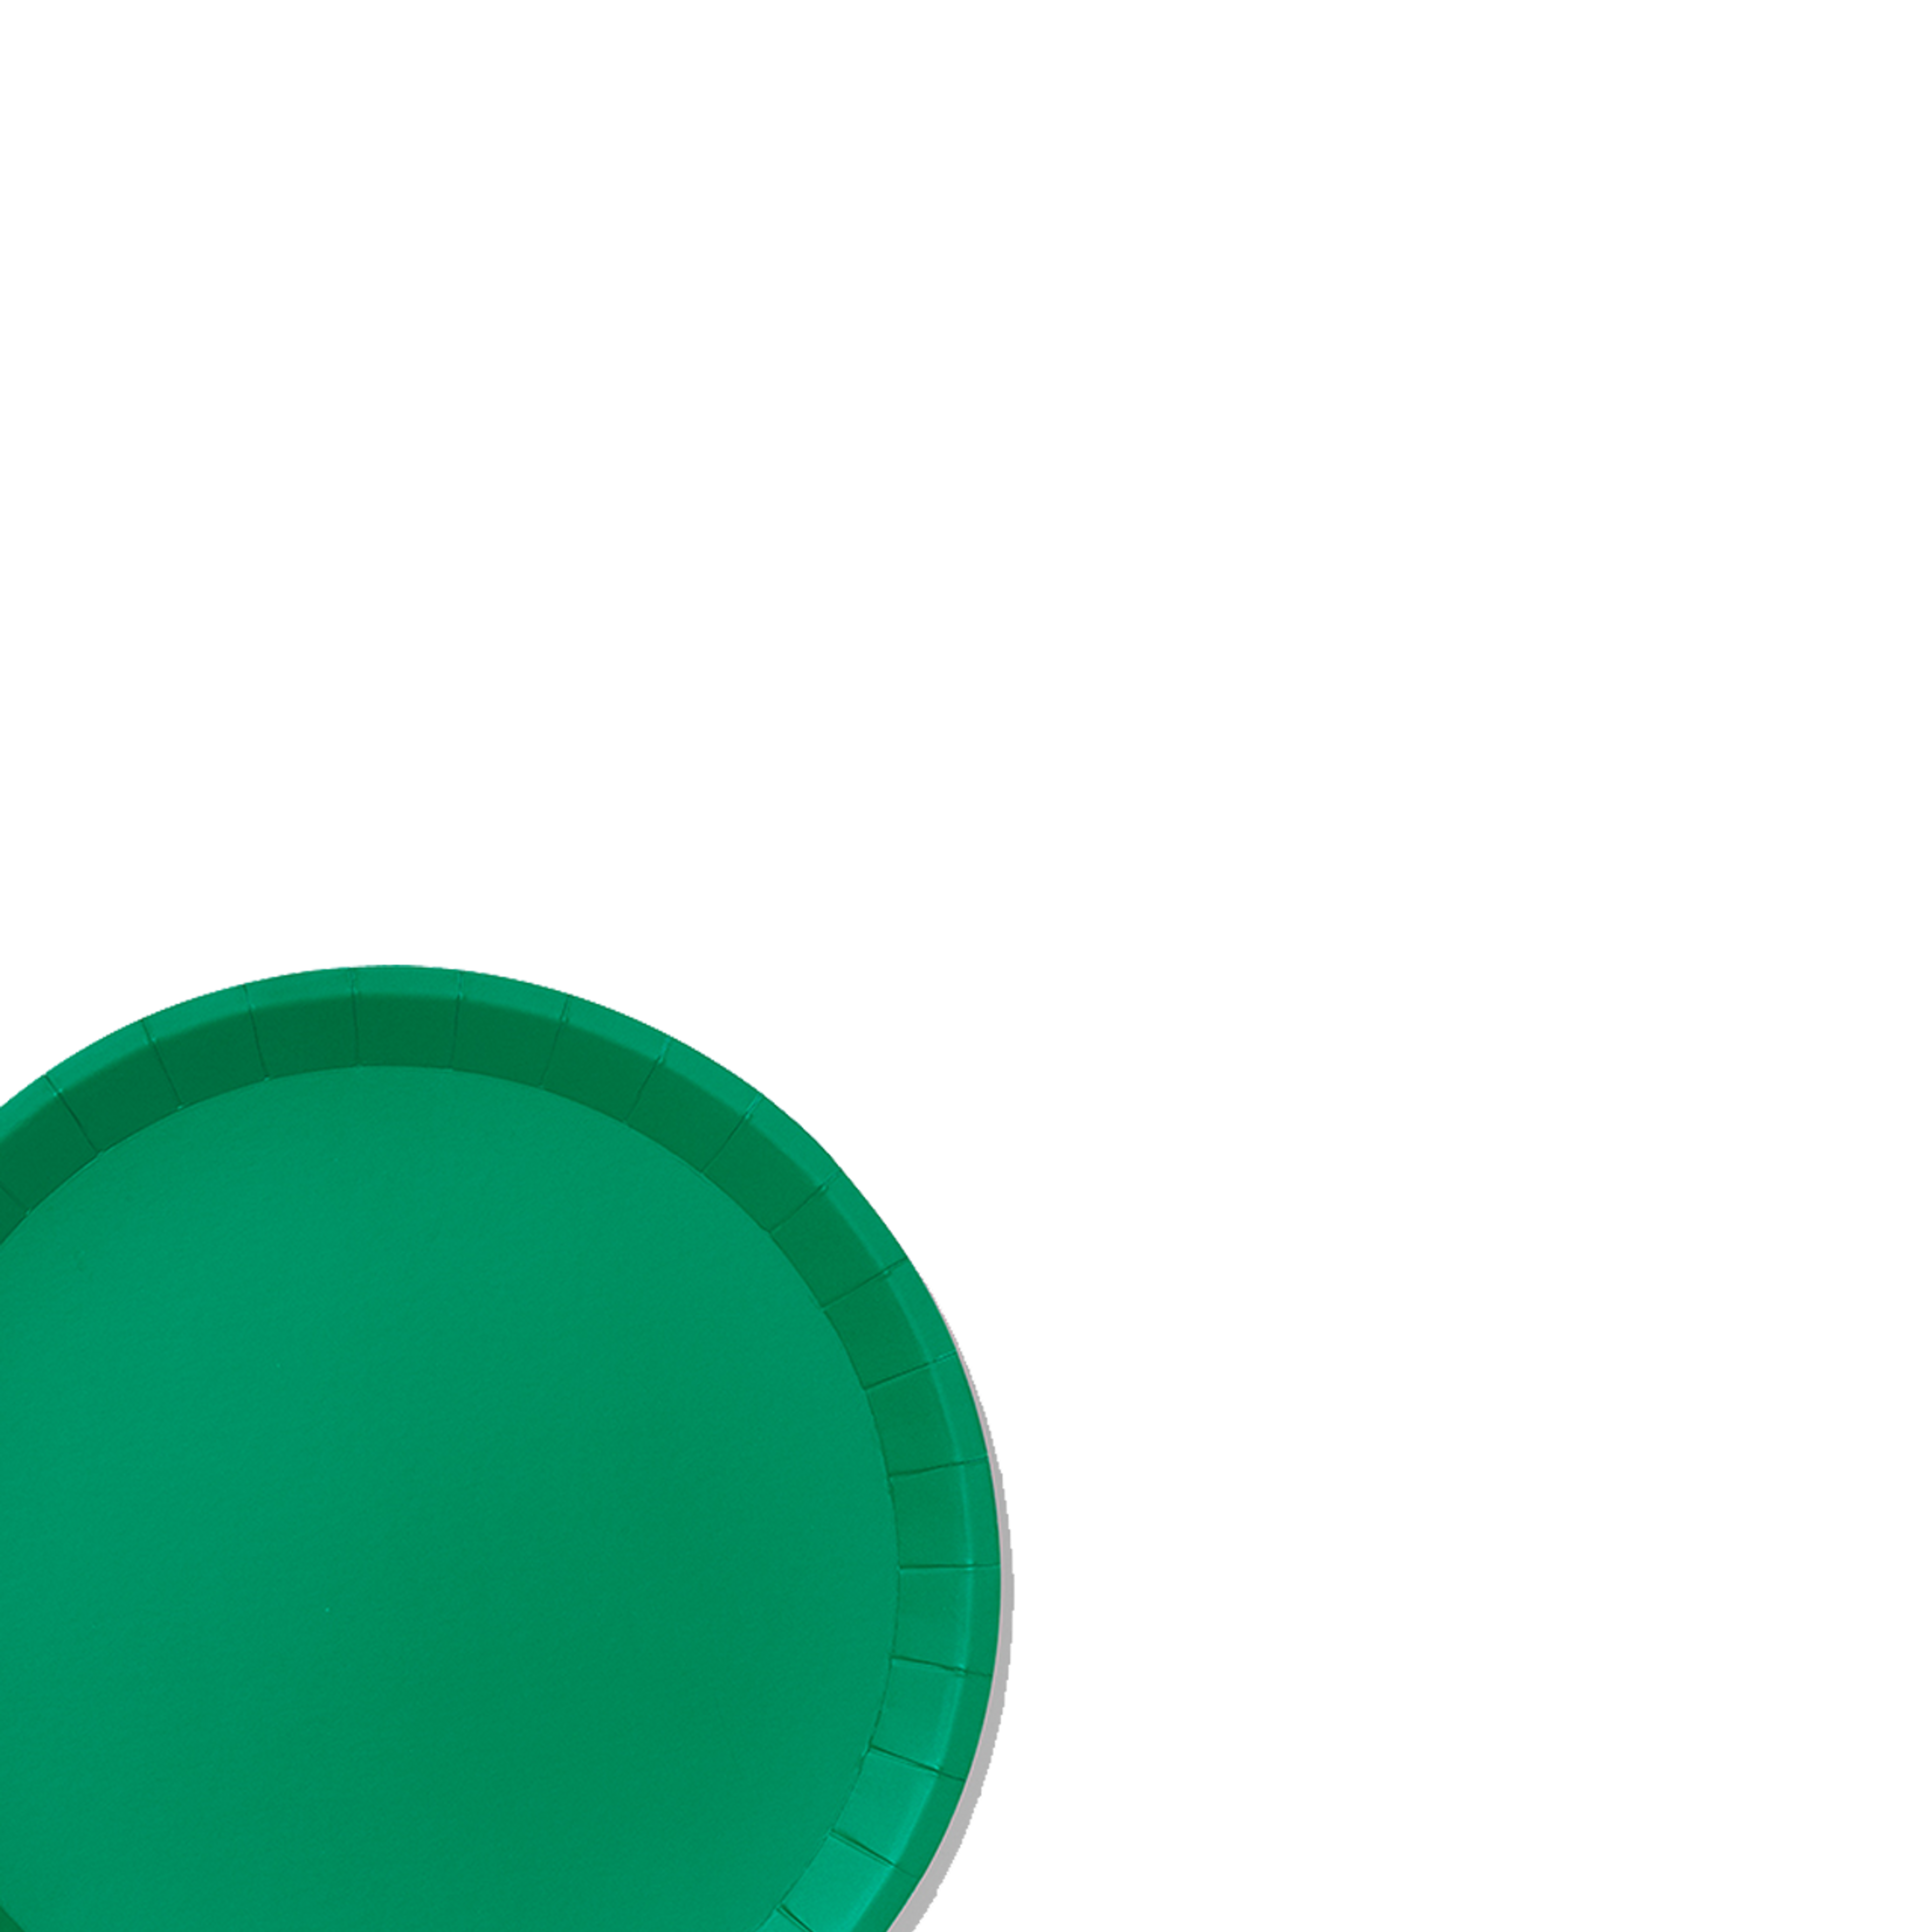 Green Classic Large Plates (10 per pack)